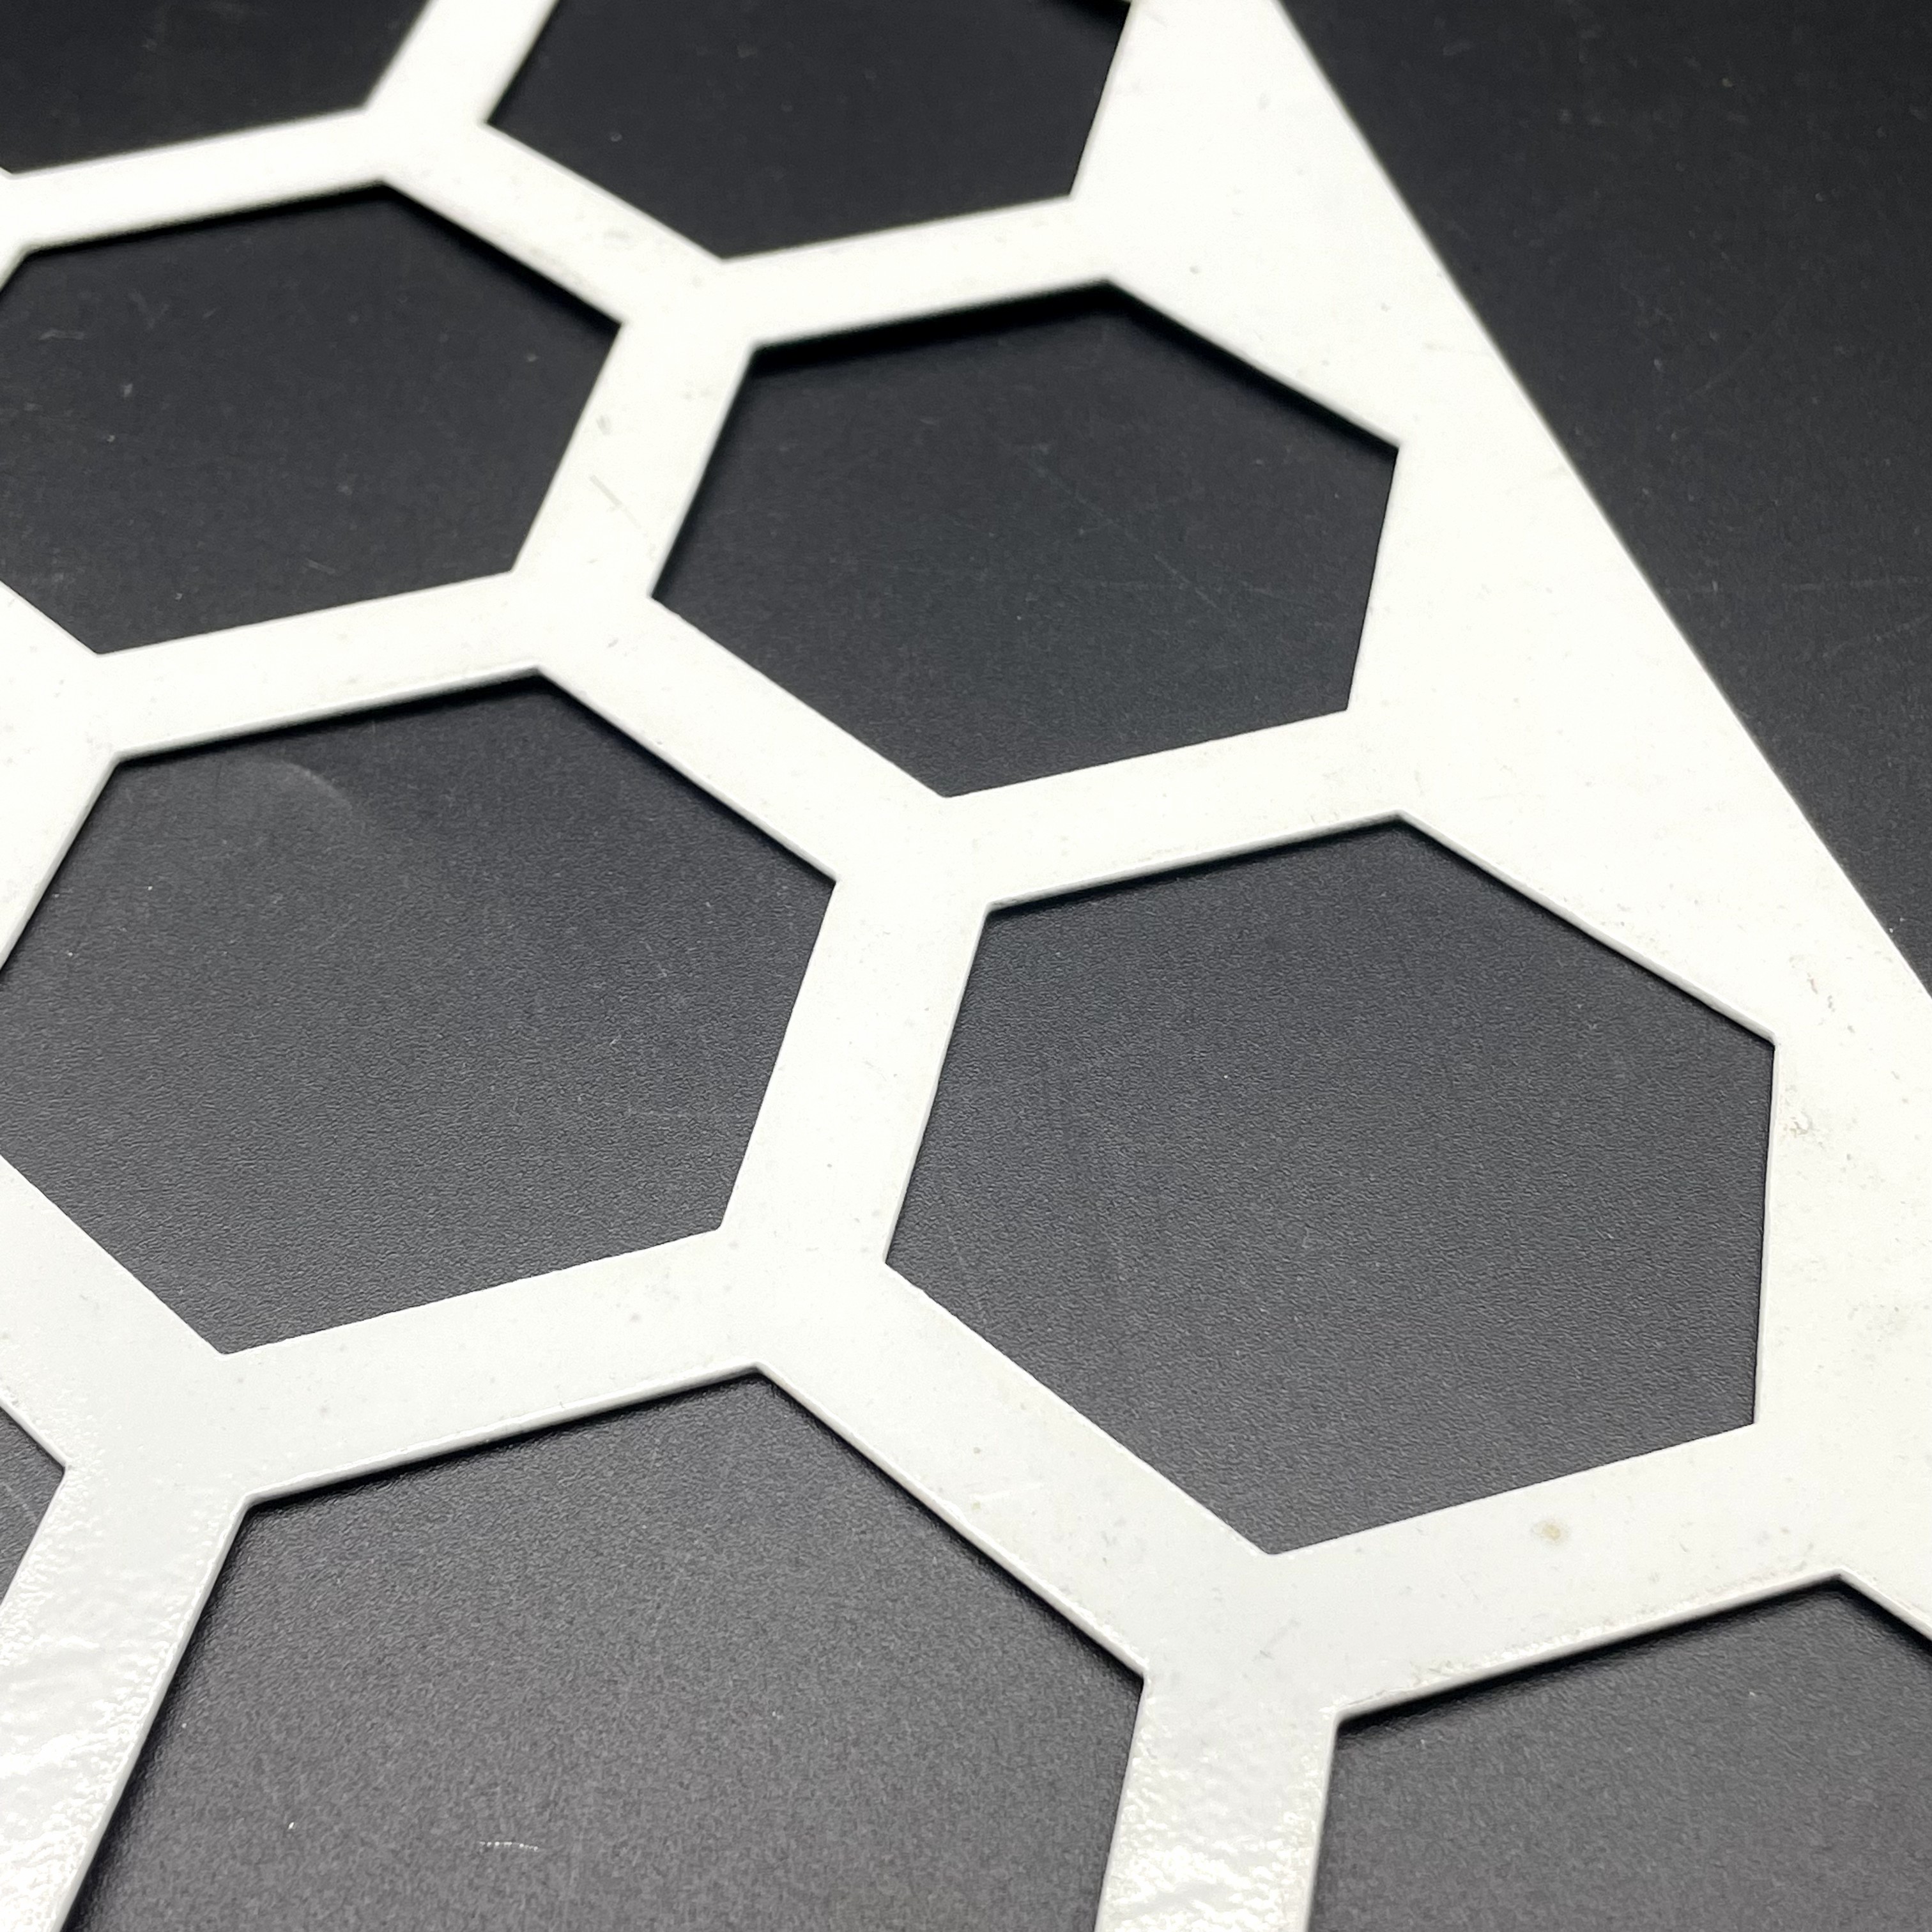 Introduction to Hexagonal Hole Perforated Mesh